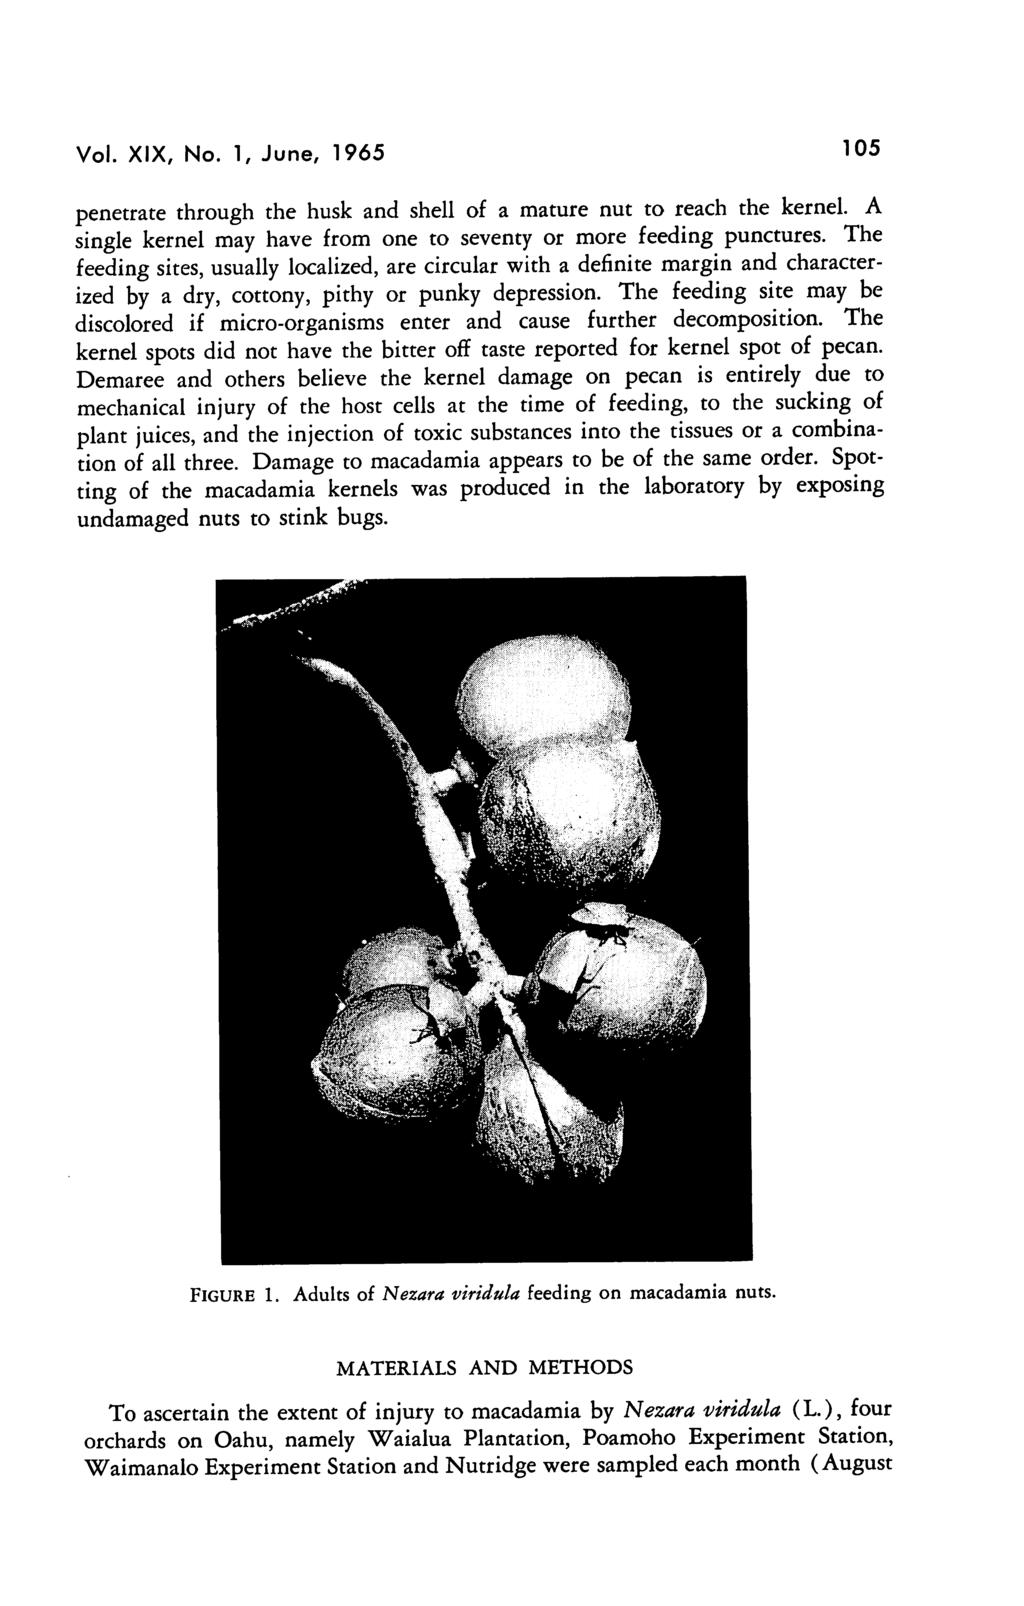 Vol. XIX, No. 1, June, 1965 105 penetrate through the husk and shell of a mature nut to reach the kernel. A single kernel may have from one to seventy or more feeding punctures.